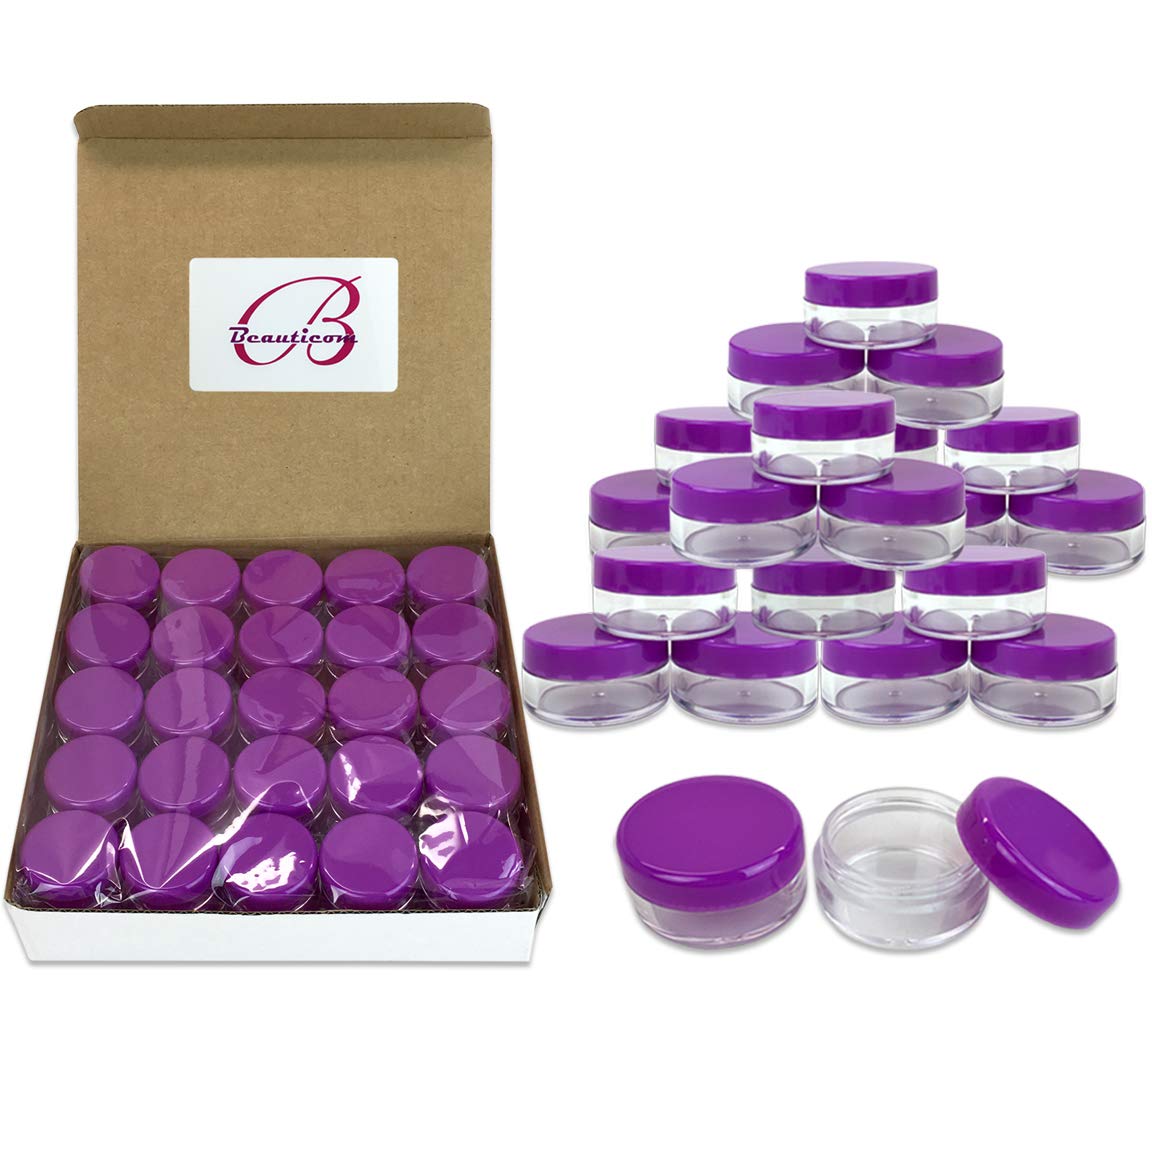 Beauticom 5G/5ML Round Clear Jars with Purple Lids for Jams, Honey, Cooking Oils, Herbs and Spices (Quantity: 100 Pieces)